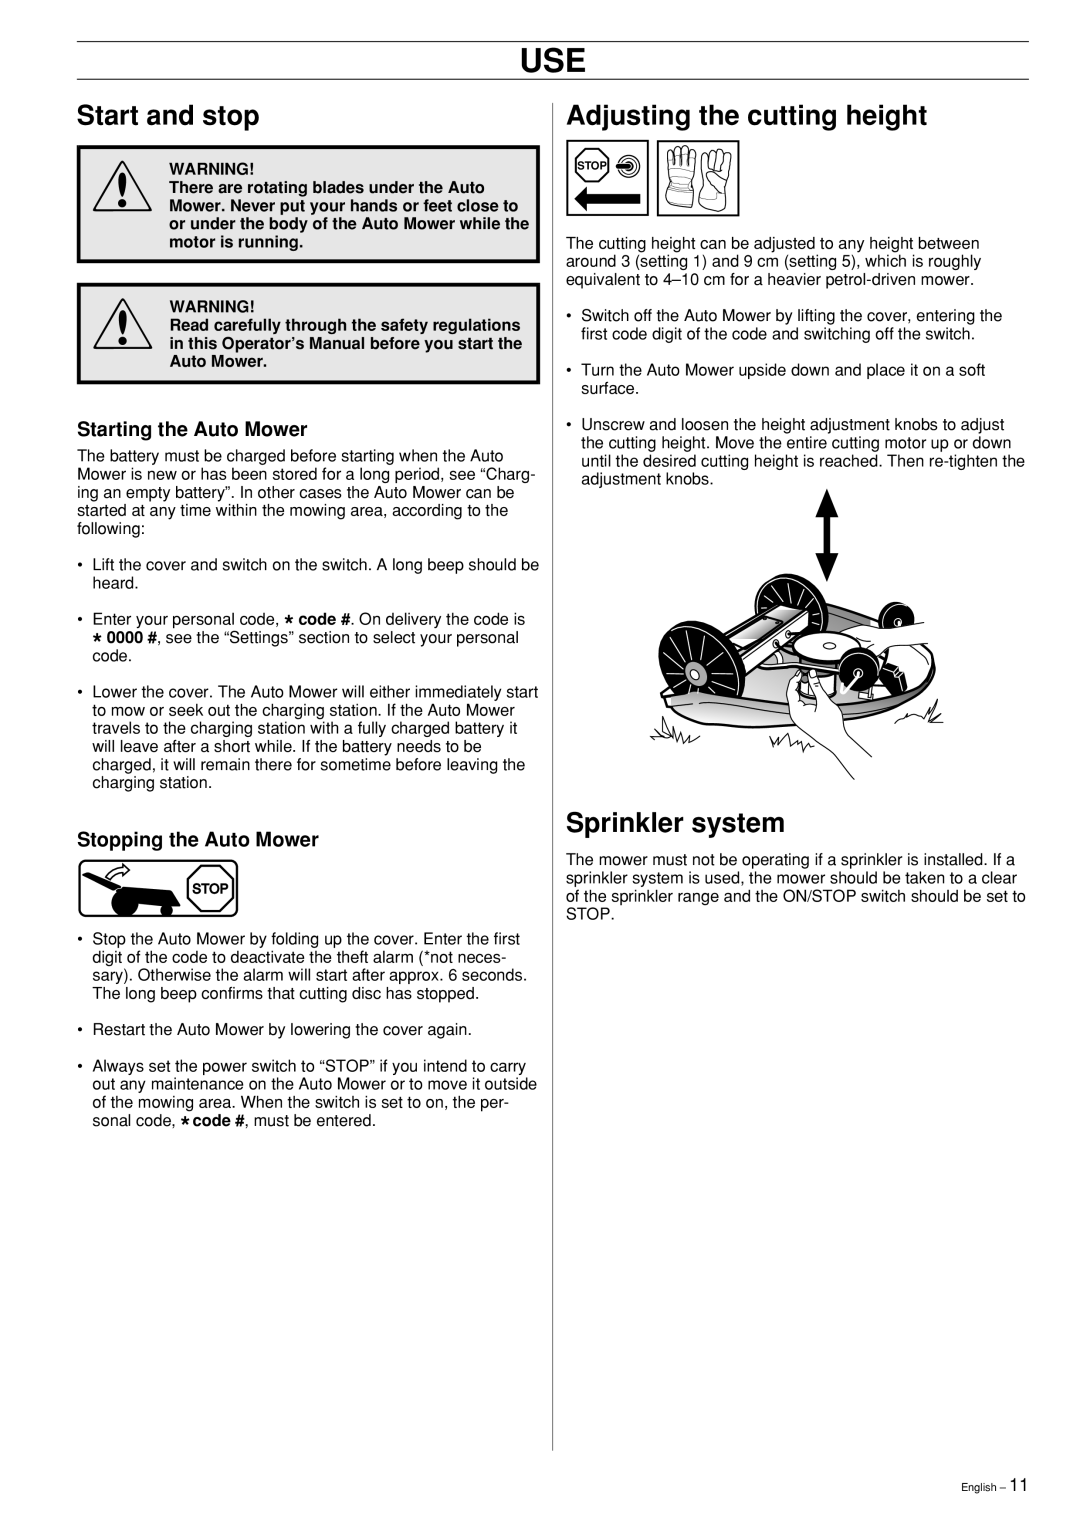 Husqvarna Robotic Lawn Mower manual Start and stop, Adjusting the cutting height, Sprinkler system, Starting the Auto Mower 